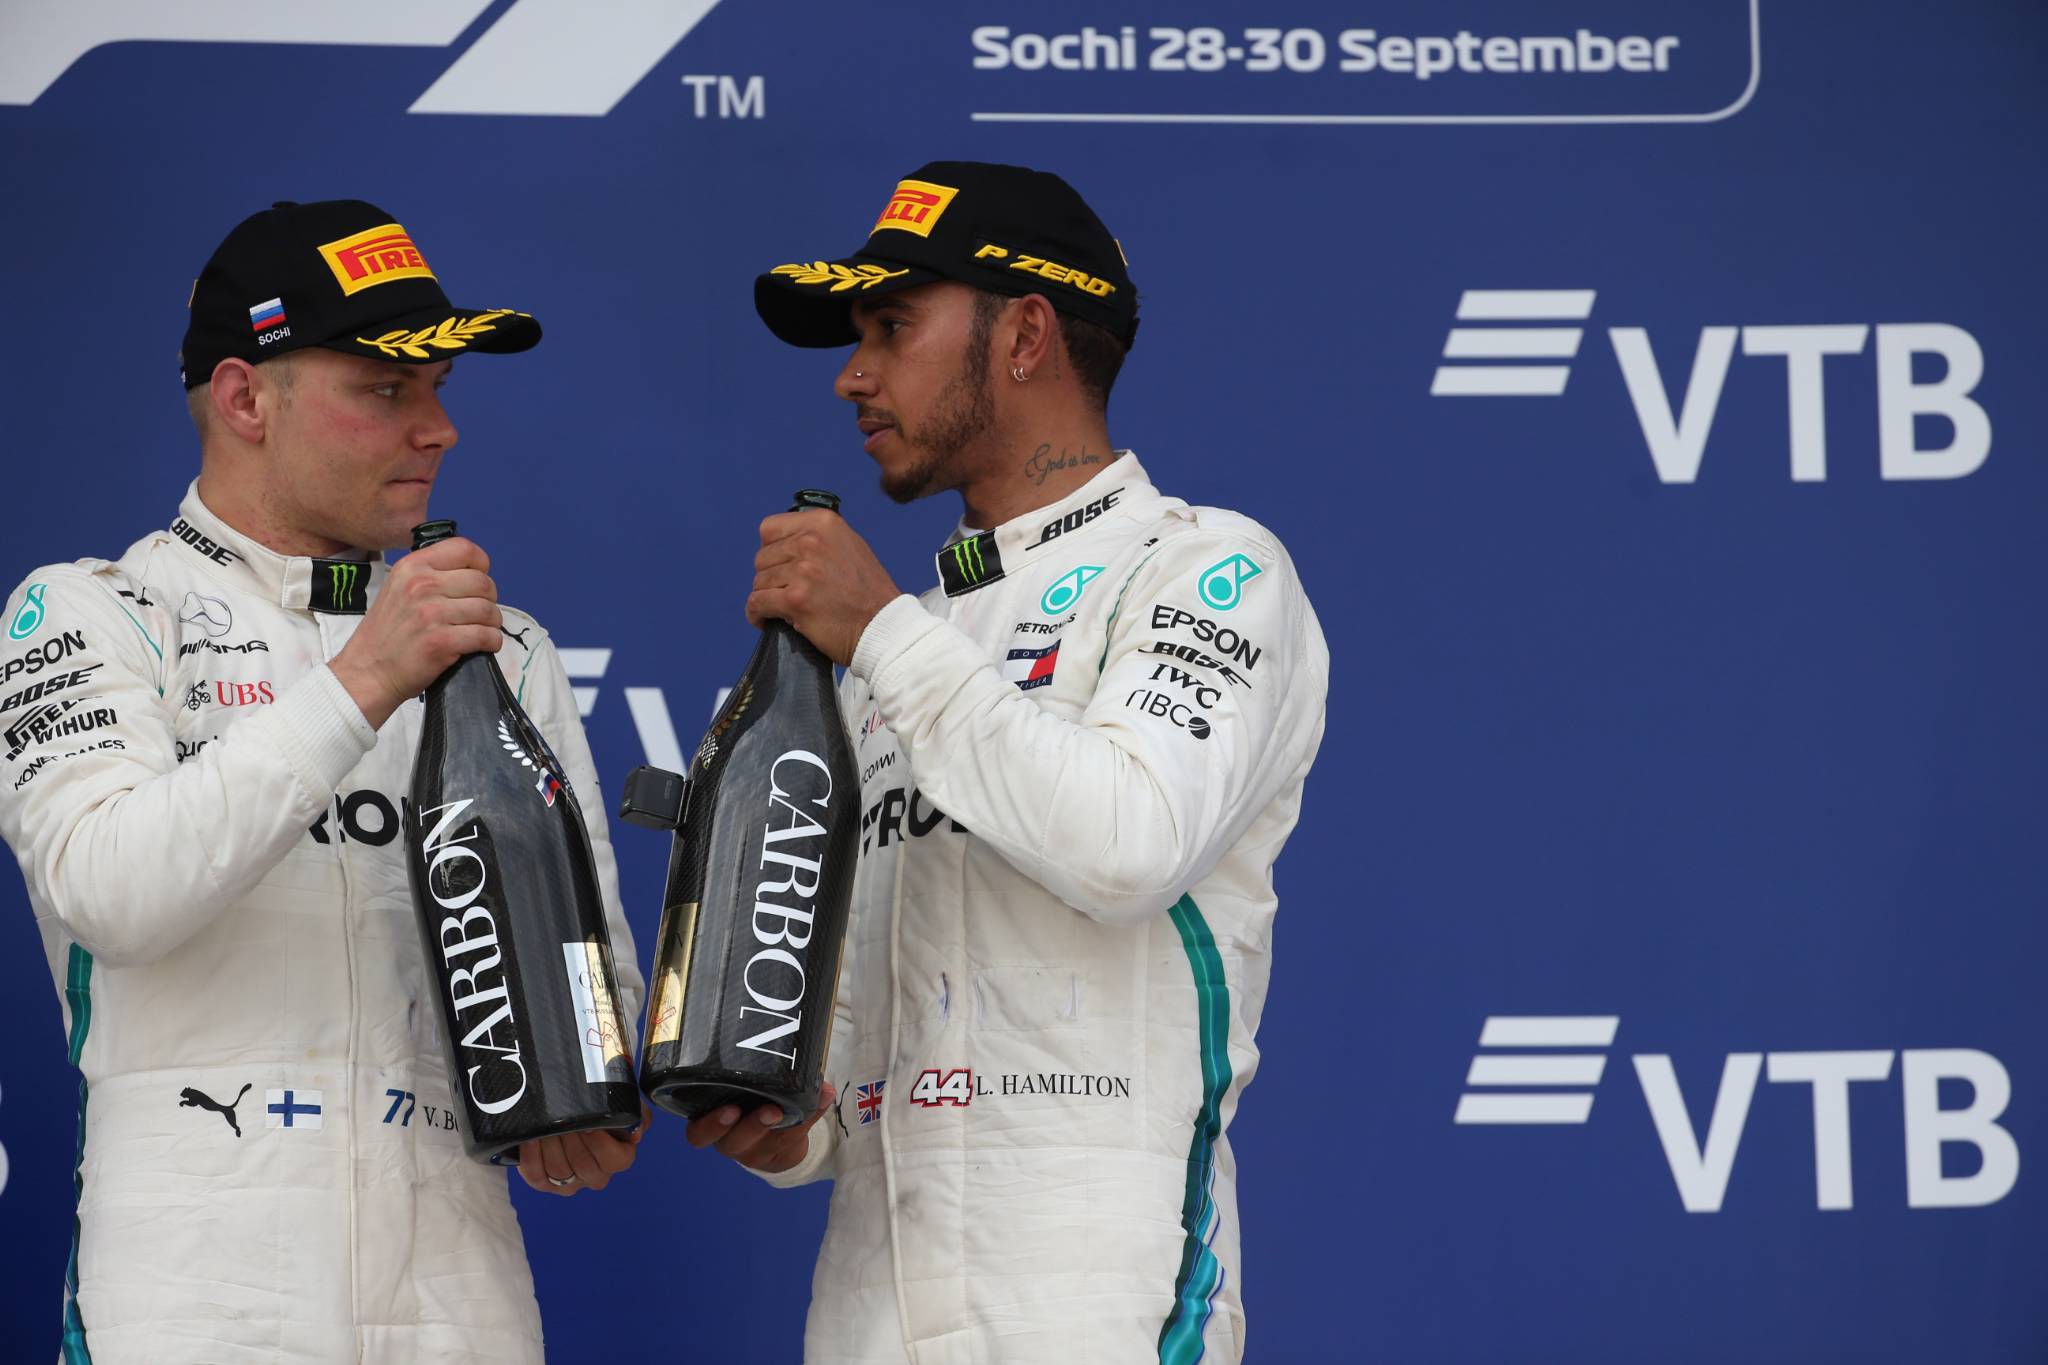 30.09.2018 - Race, 2nd place Valtteri Bottas (FIN) Mercedes AMG F1 W09 and Lewis Hamilton (GBR) Mercedes AMG F1 W09 race winner